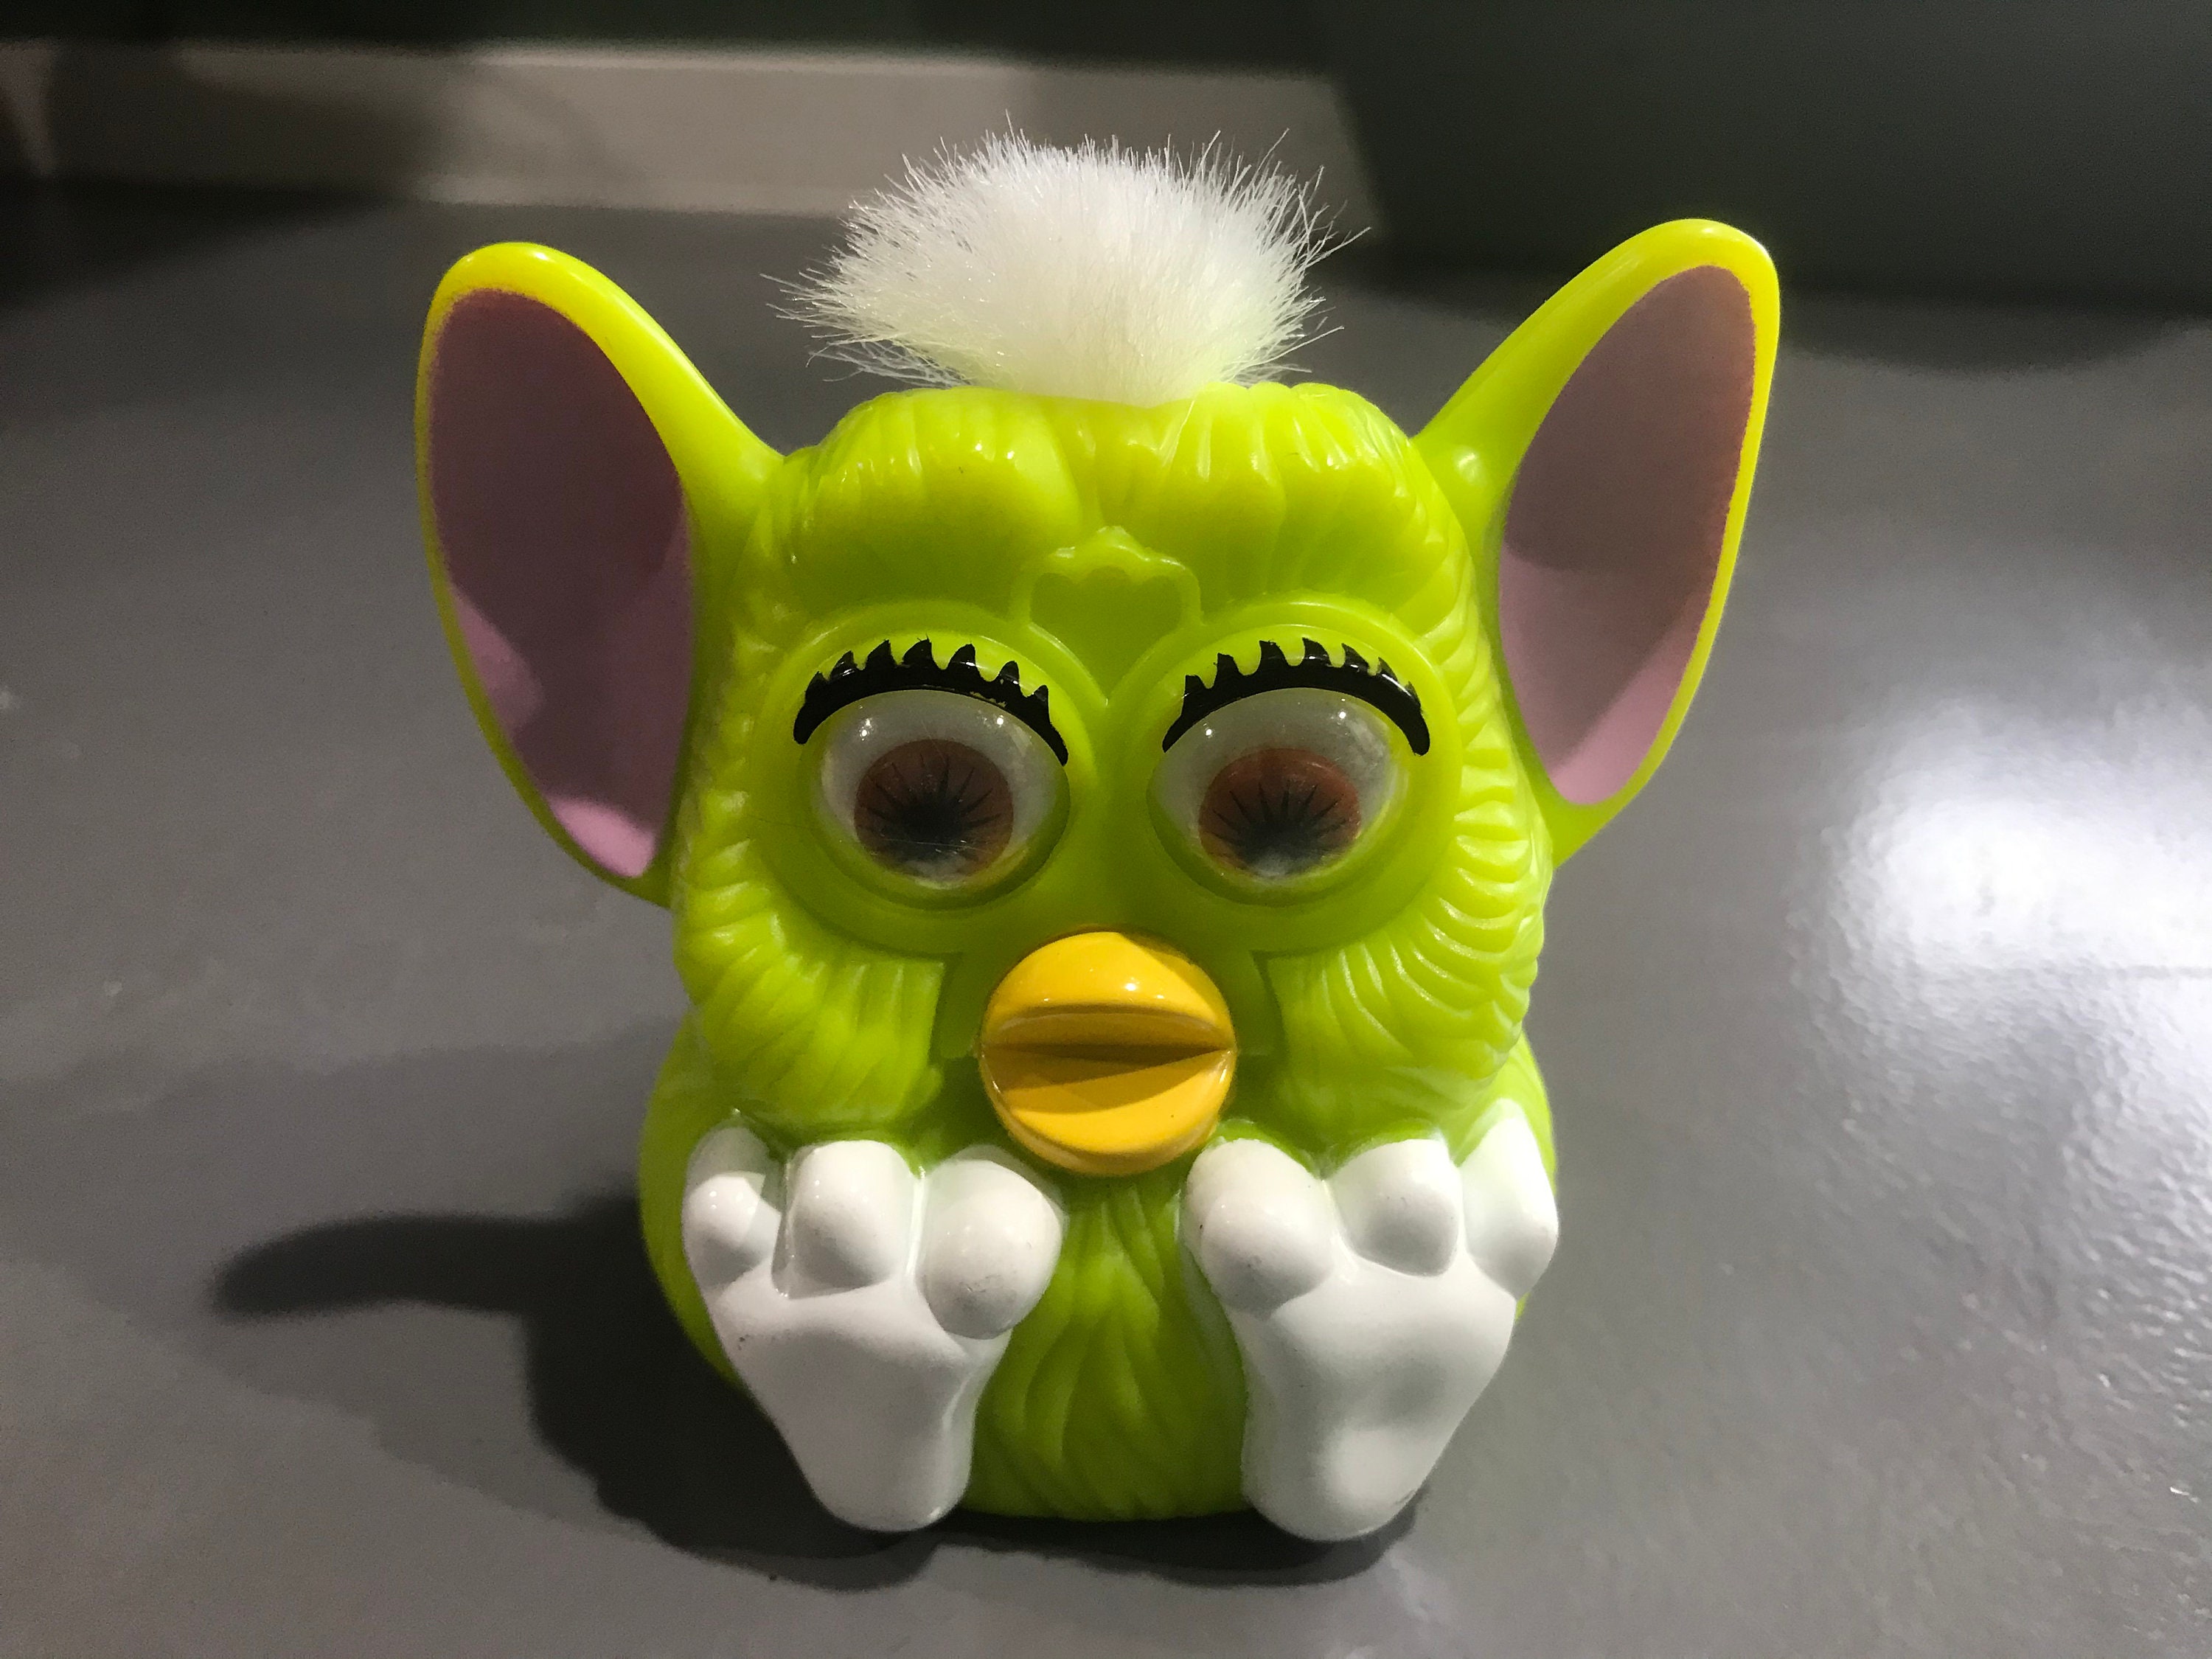 Vintage 1998 Mcdonalds Furby Bright Green With White Hair Toy 